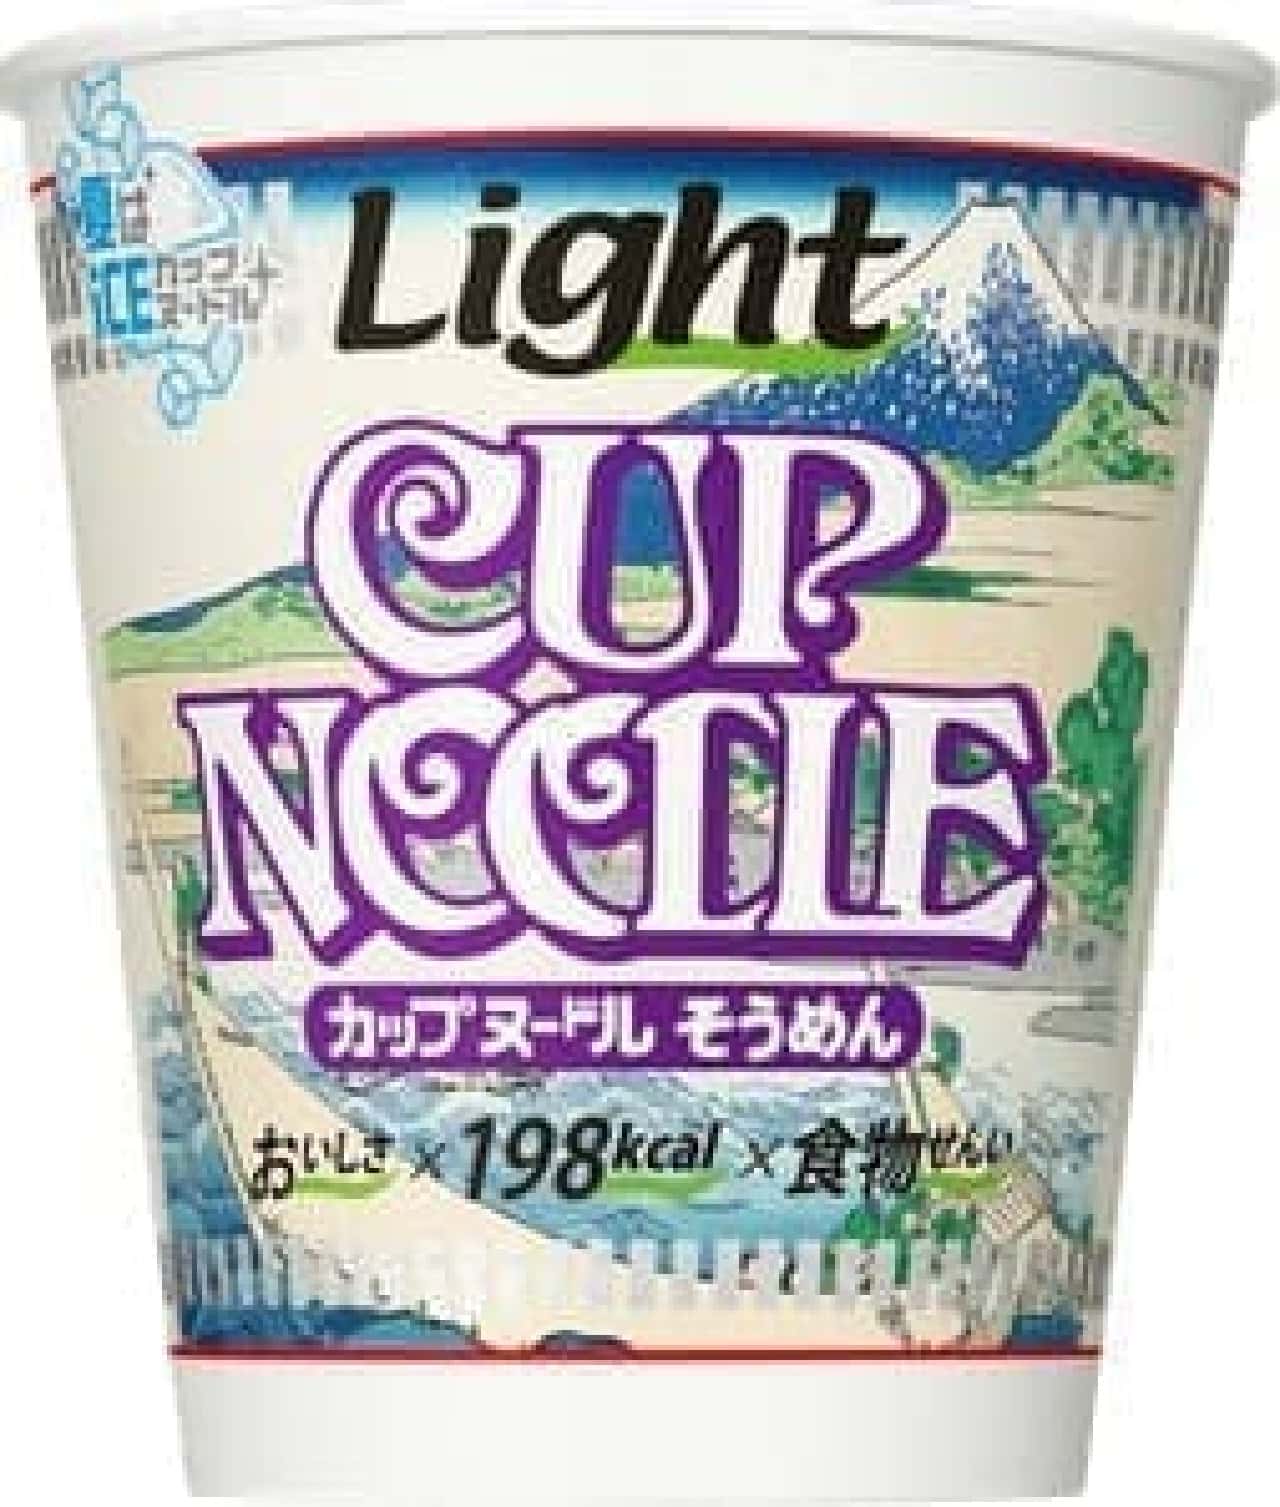 Introducing the first cup noodle "somen"